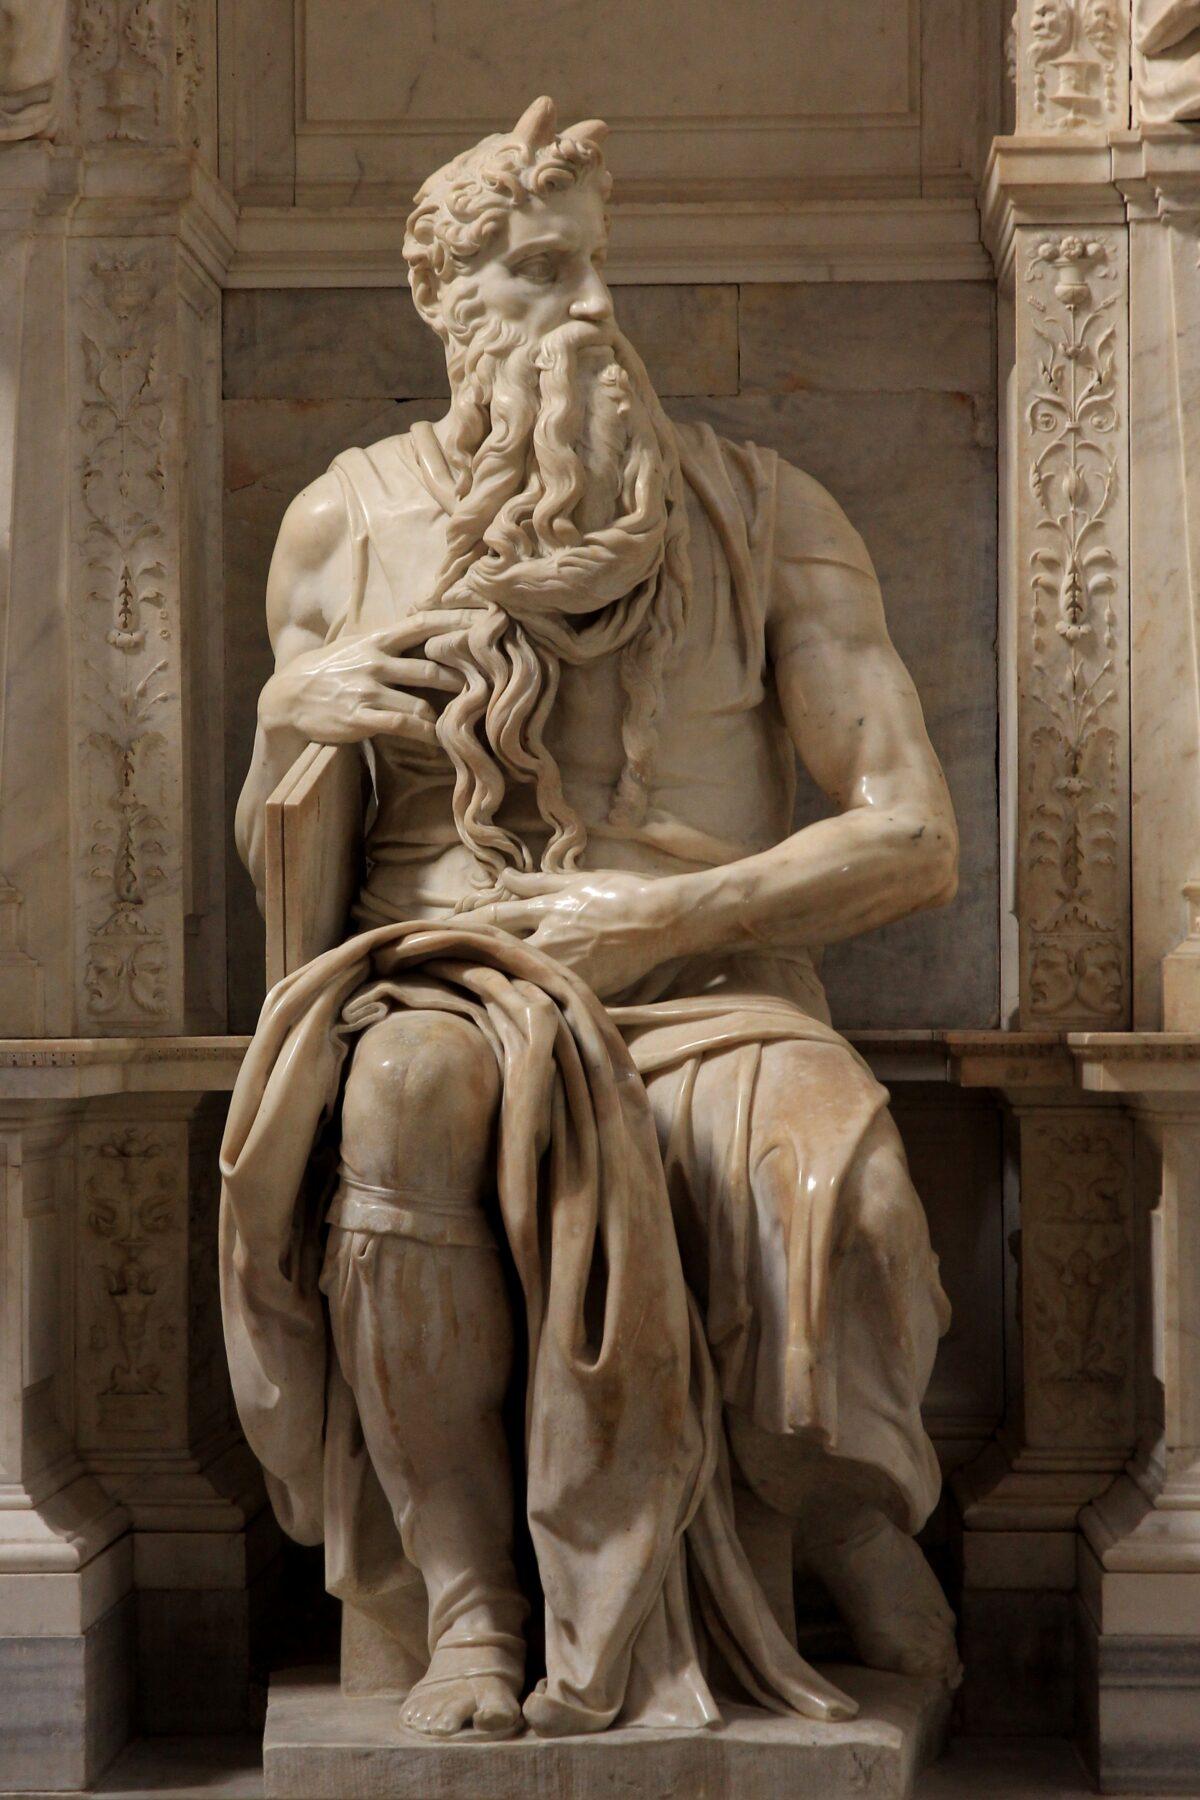 Moses could see the unseeable. “Moses” by Michelangelo in the church of San Pietro in Vincoli in Rome. (The horns on Moses’s head are attributed to the Latin translation of the Bible at the time of the statue’s creation.) (Jorg Bittner Unna CC BY 3.0)